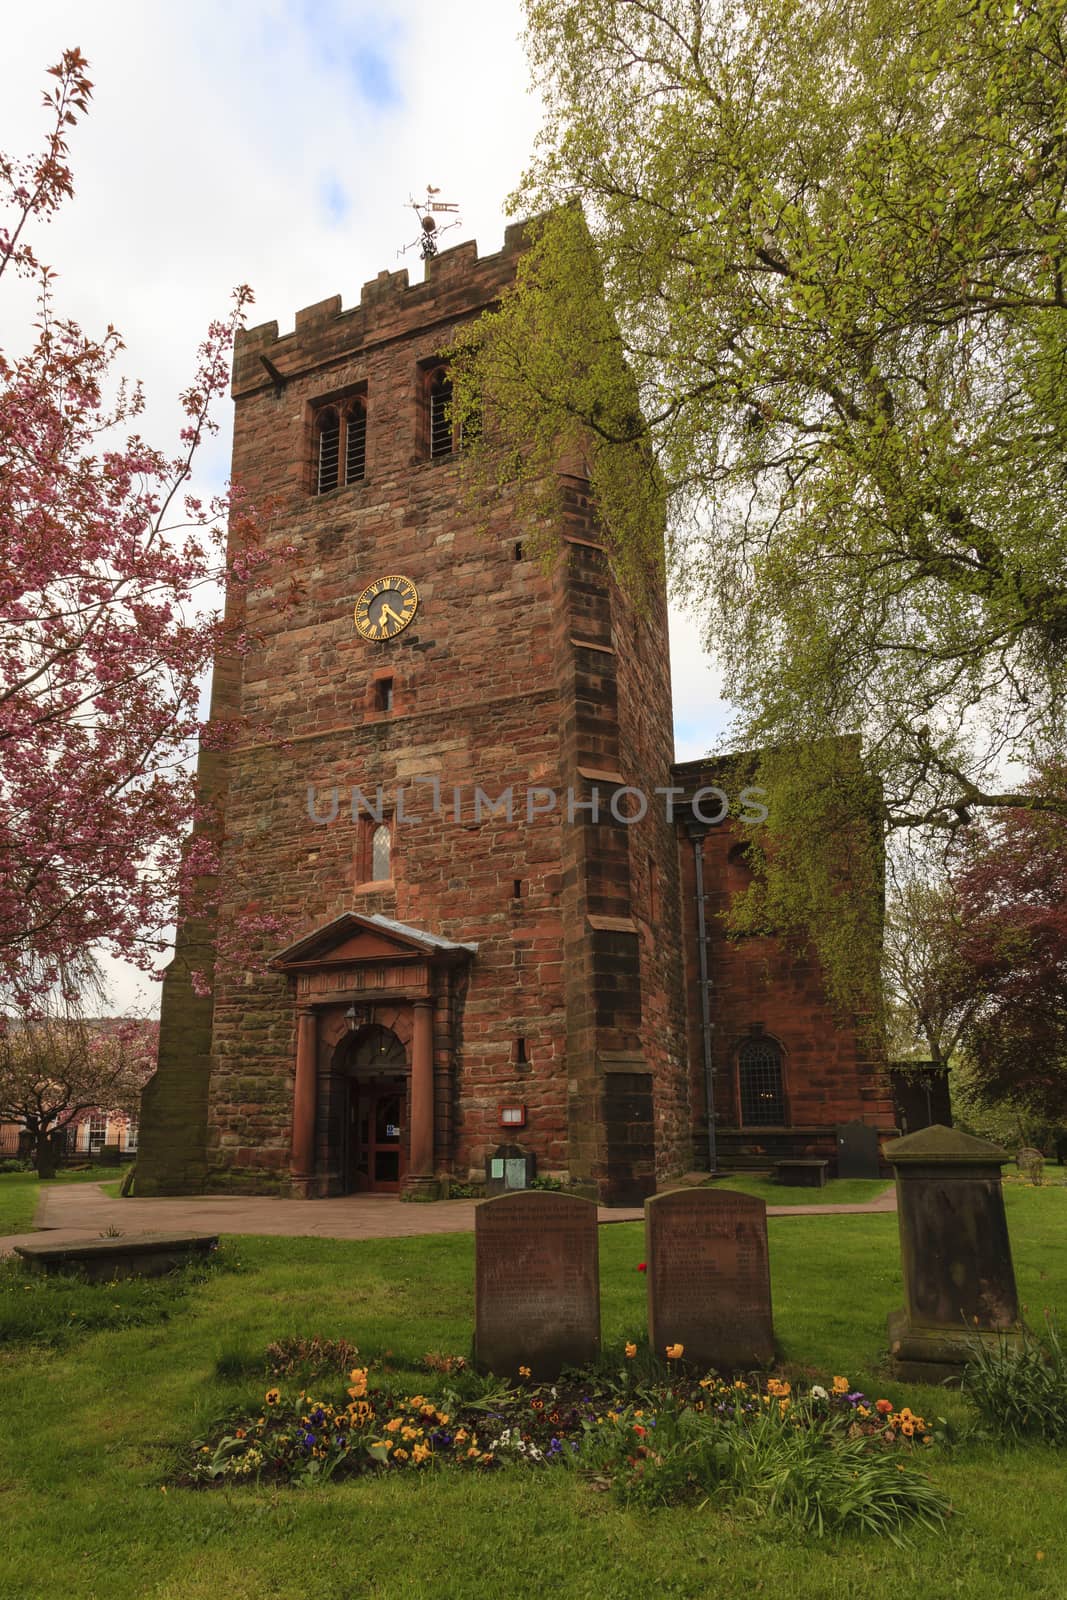 St Andrew's Church by ATGImages